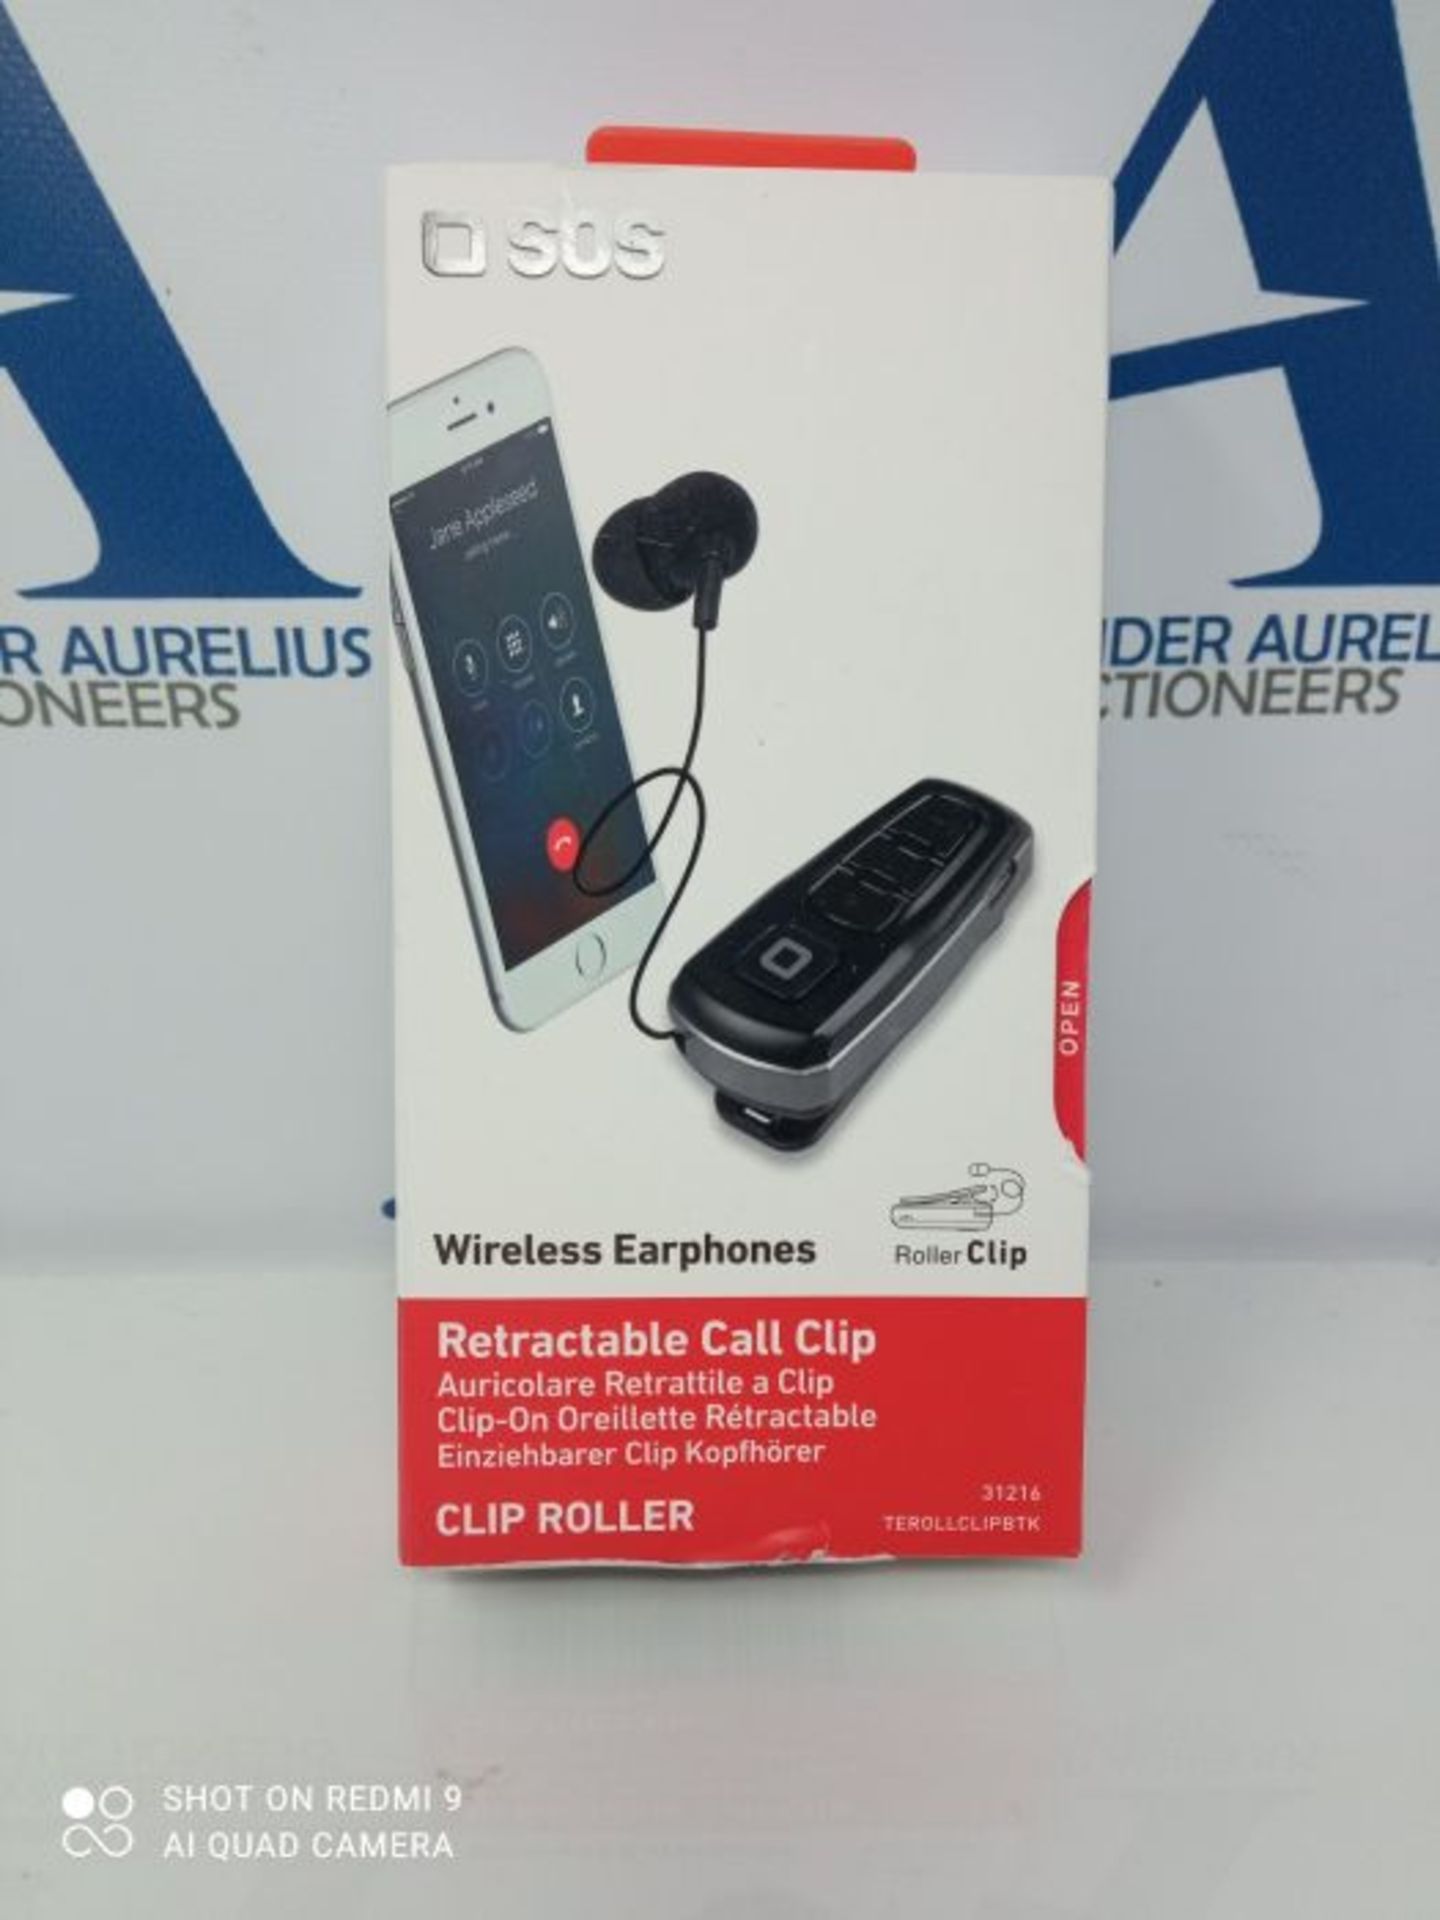 SBS Bluetooth Headset with Clip and Roll-up Wire Multipoint Technology to connect 2 de - Image 5 of 6